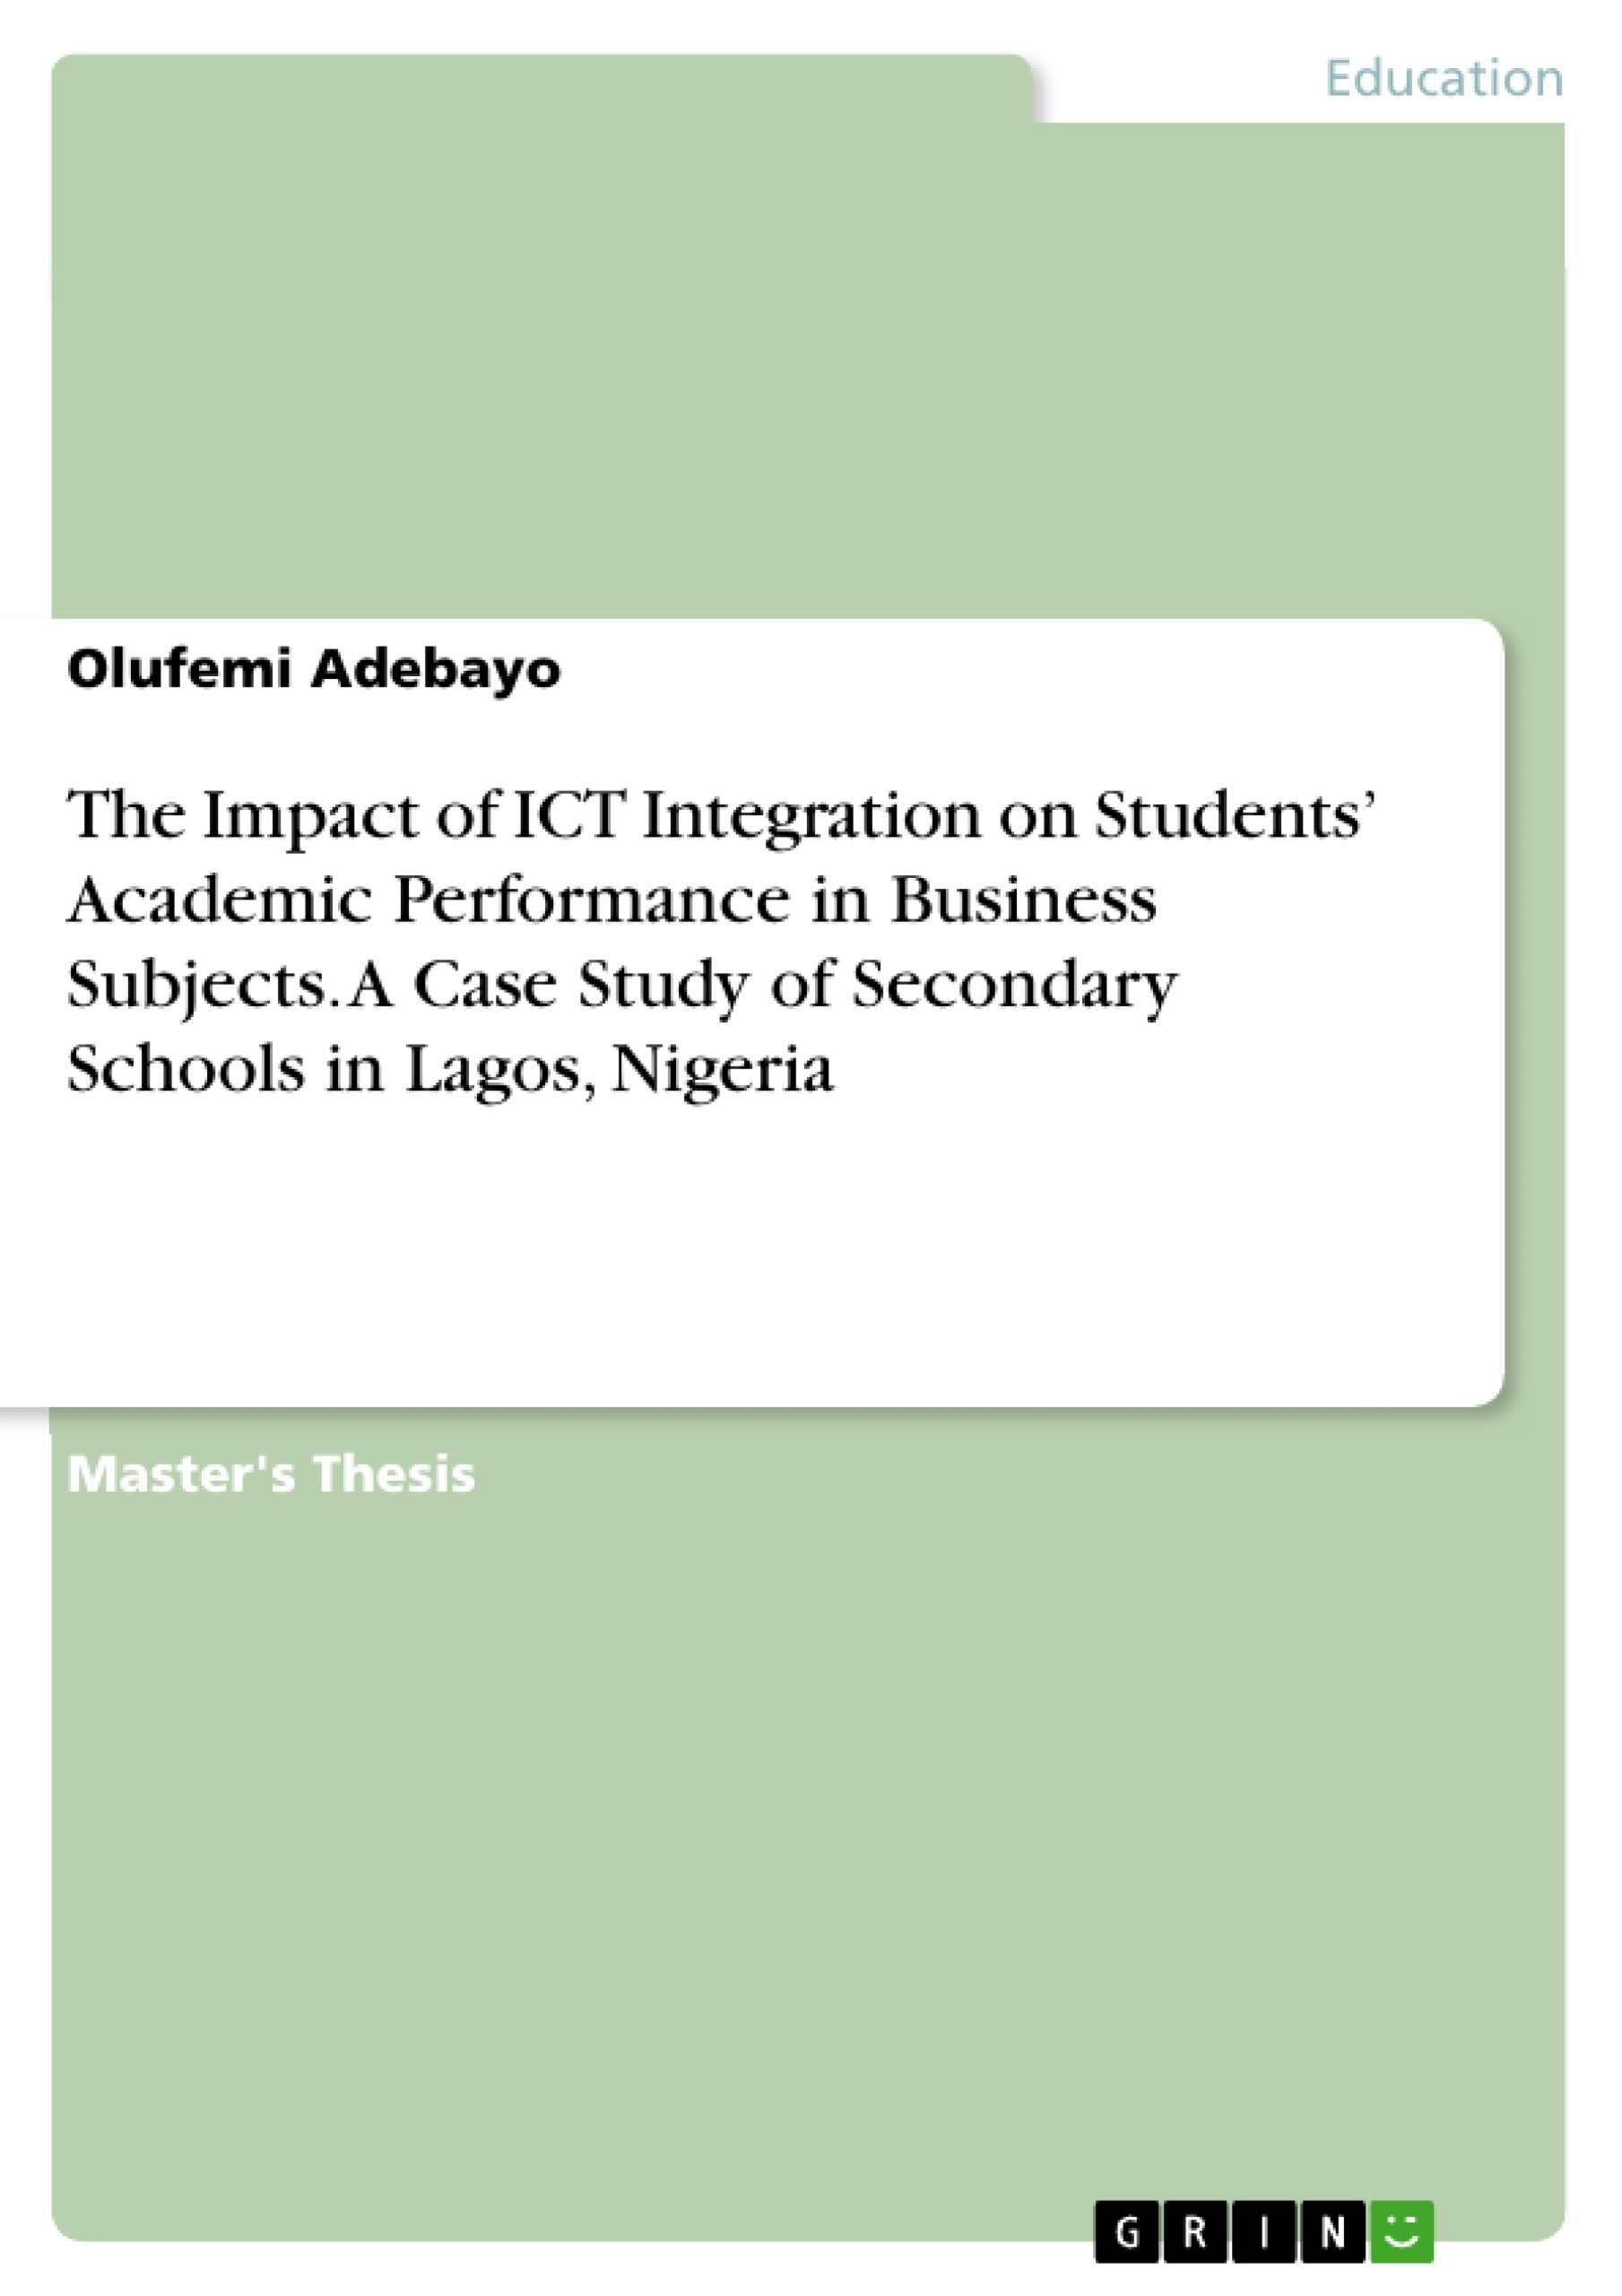 Title: The Impact of ICT Integration on Students’ Academic Performance in Business Subjects. A Case Study of Secondary Schools in Lagos, Nigeria